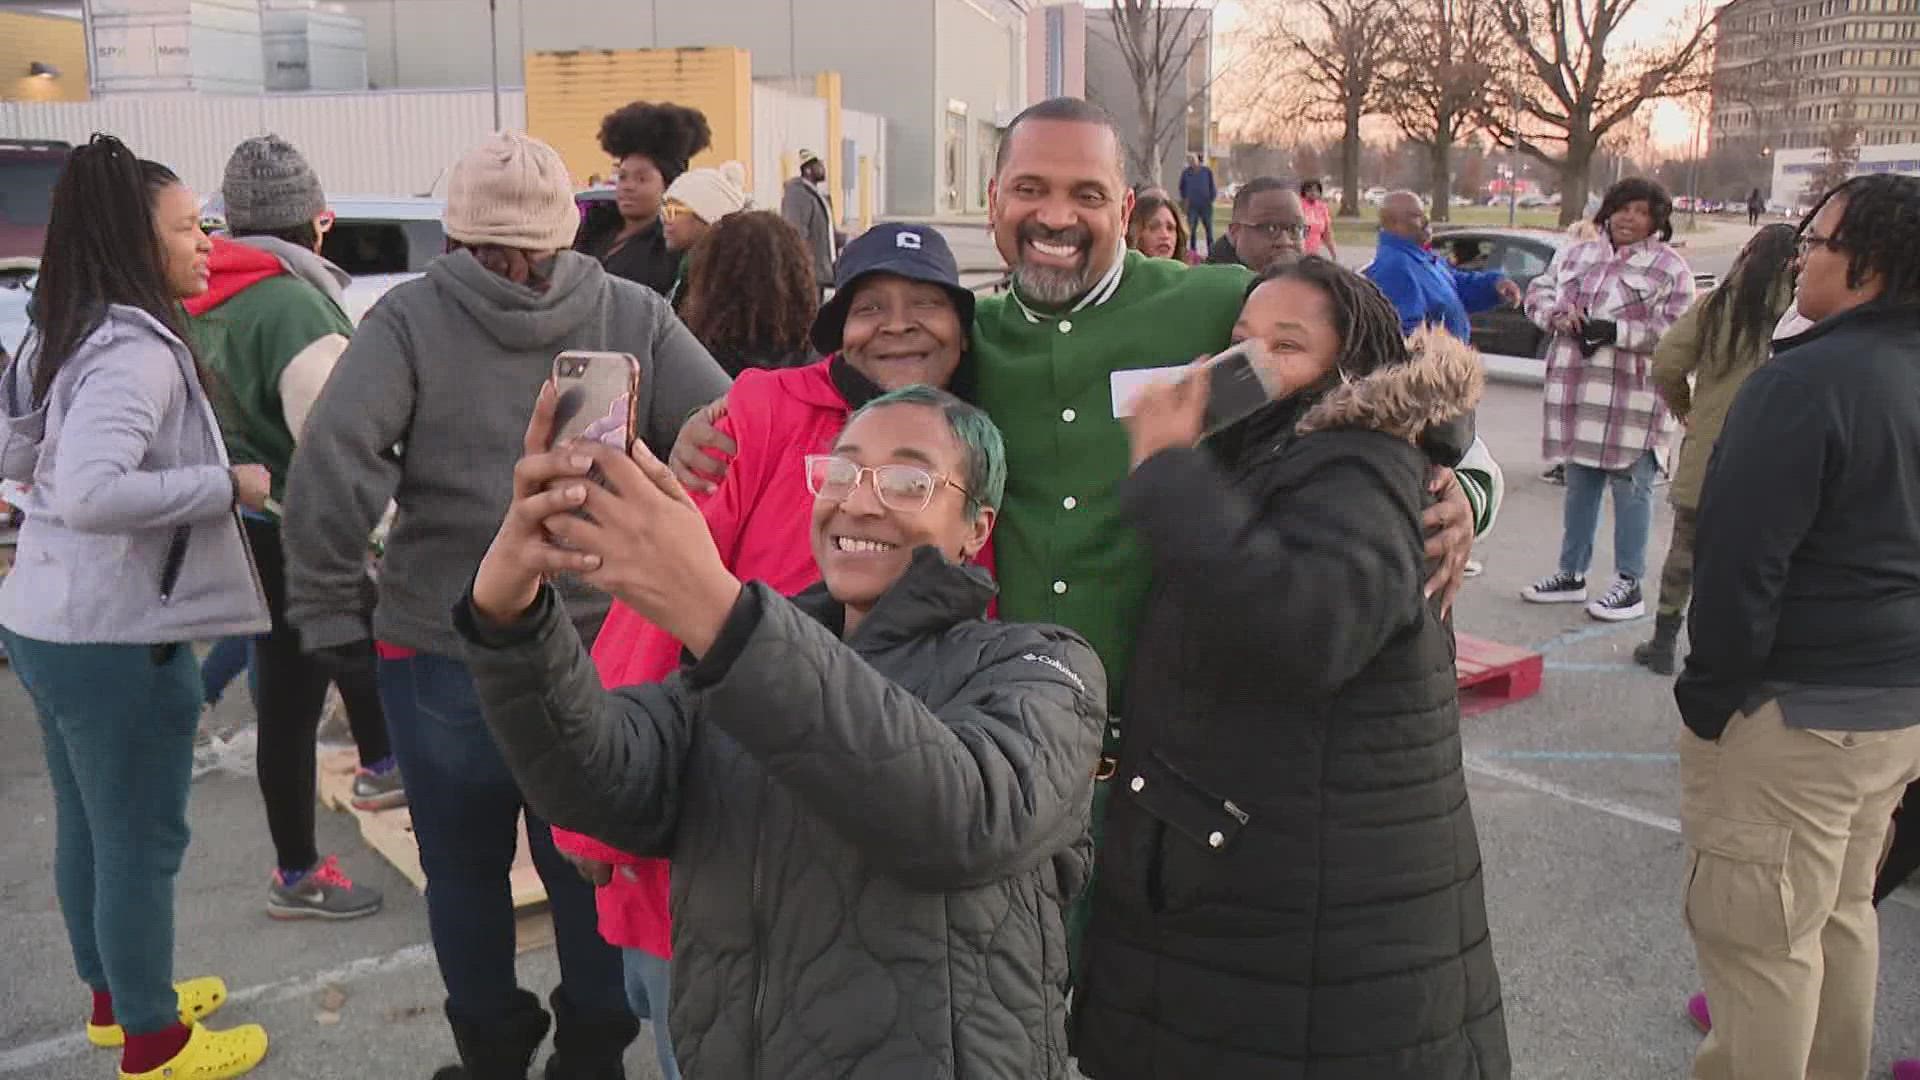 Actor and comedian Mike Epps joined with Amp Harris to pass out turkeys to Hoosiers in need Tuesday.